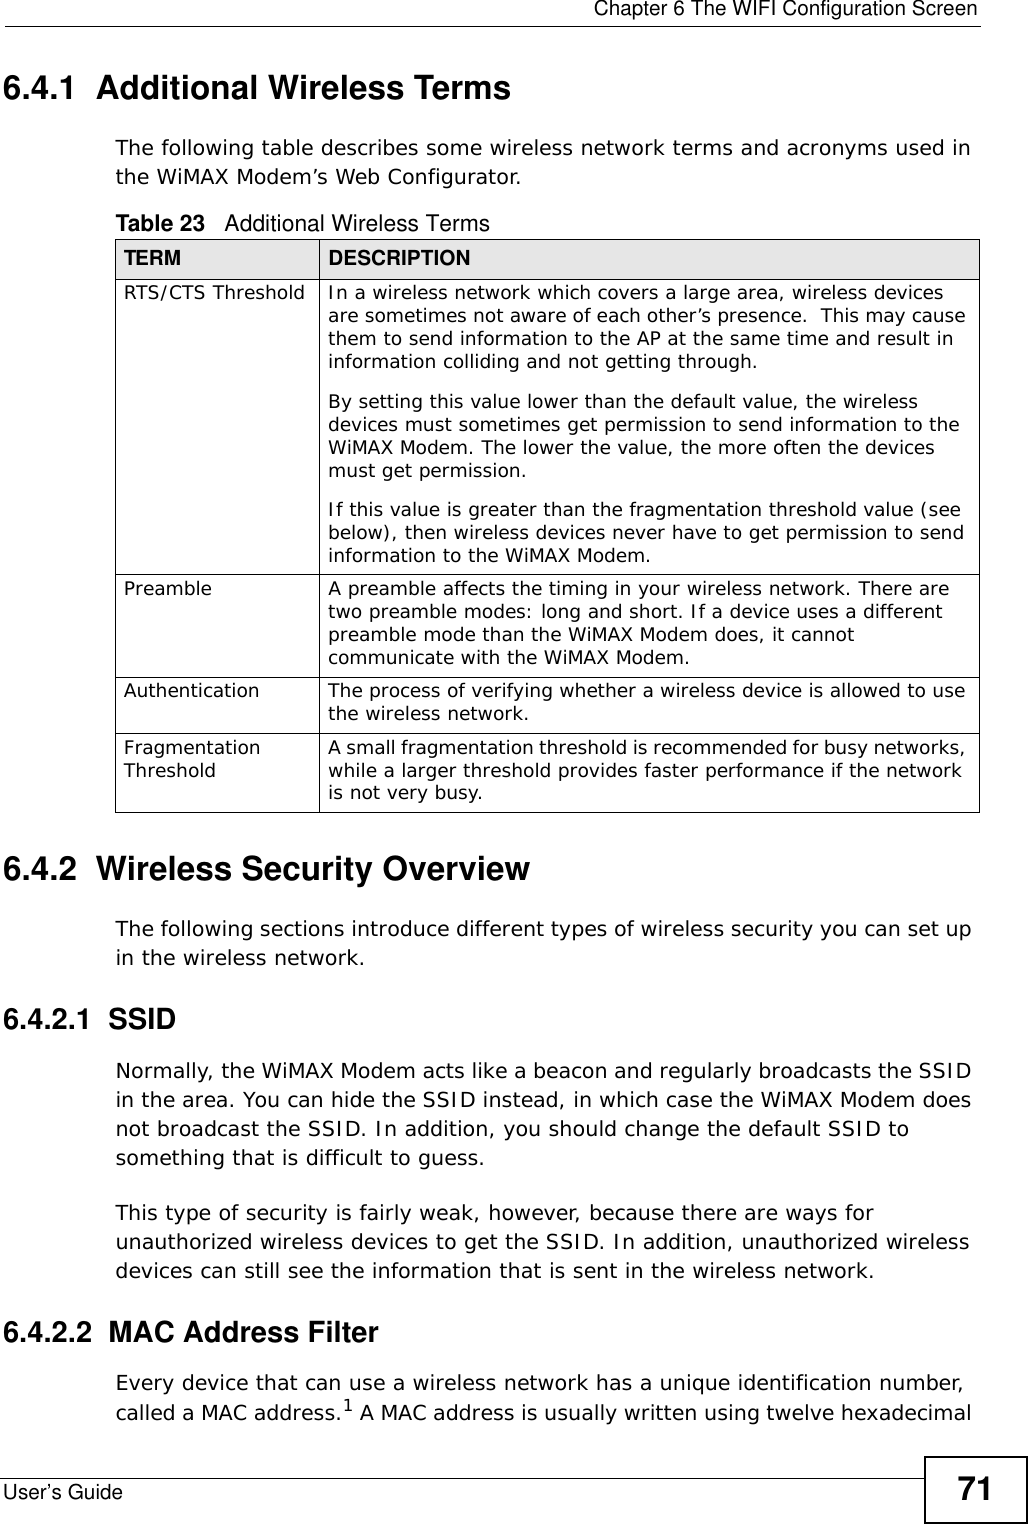  Chapter 6 The WIFI Configuration ScreenUser’s Guide 716.4.1  Additional Wireless TermsThe following table describes some wireless network terms and acronyms used in the WiMAX Modem’s Web Configurator.6.4.2  Wireless Security OverviewThe following sections introduce different types of wireless security you can set up in the wireless network.6.4.2.1  SSIDNormally, the WiMAX Modem acts like a beacon and regularly broadcasts the SSID in the area. You can hide the SSID instead, in which case the WiMAX Modem does not broadcast the SSID. In addition, you should change the default SSID to something that is difficult to guess.This type of security is fairly weak, however, because there are ways for unauthorized wireless devices to get the SSID. In addition, unauthorized wireless devices can still see the information that is sent in the wireless network.6.4.2.2  MAC Address FilterEvery device that can use a wireless network has a unique identification number, called a MAC address.1 A MAC address is usually written using twelve hexadecimal Table 23   Additional Wireless TermsTERM DESCRIPTIONRTS/CTS Threshold In a wireless network which covers a large area, wireless devices are sometimes not aware of each other’s presence.  This may cause them to send information to the AP at the same time and result in information colliding and not getting through.By setting this value lower than the default value, the wireless devices must sometimes get permission to send information to the WiMAX Modem. The lower the value, the more often the devices must get permission.If this value is greater than the fragmentation threshold value (see below), then wireless devices never have to get permission to send information to the WiMAX Modem.Preamble A preamble affects the timing in your wireless network. There are two preamble modes: long and short. If a device uses a different preamble mode than the WiMAX Modem does, it cannot communicate with the WiMAX Modem.Authentication The process of verifying whether a wireless device is allowed to use the wireless network.Fragmentation Threshold A small fragmentation threshold is recommended for busy networks, while a larger threshold provides faster performance if the network is not very busy.